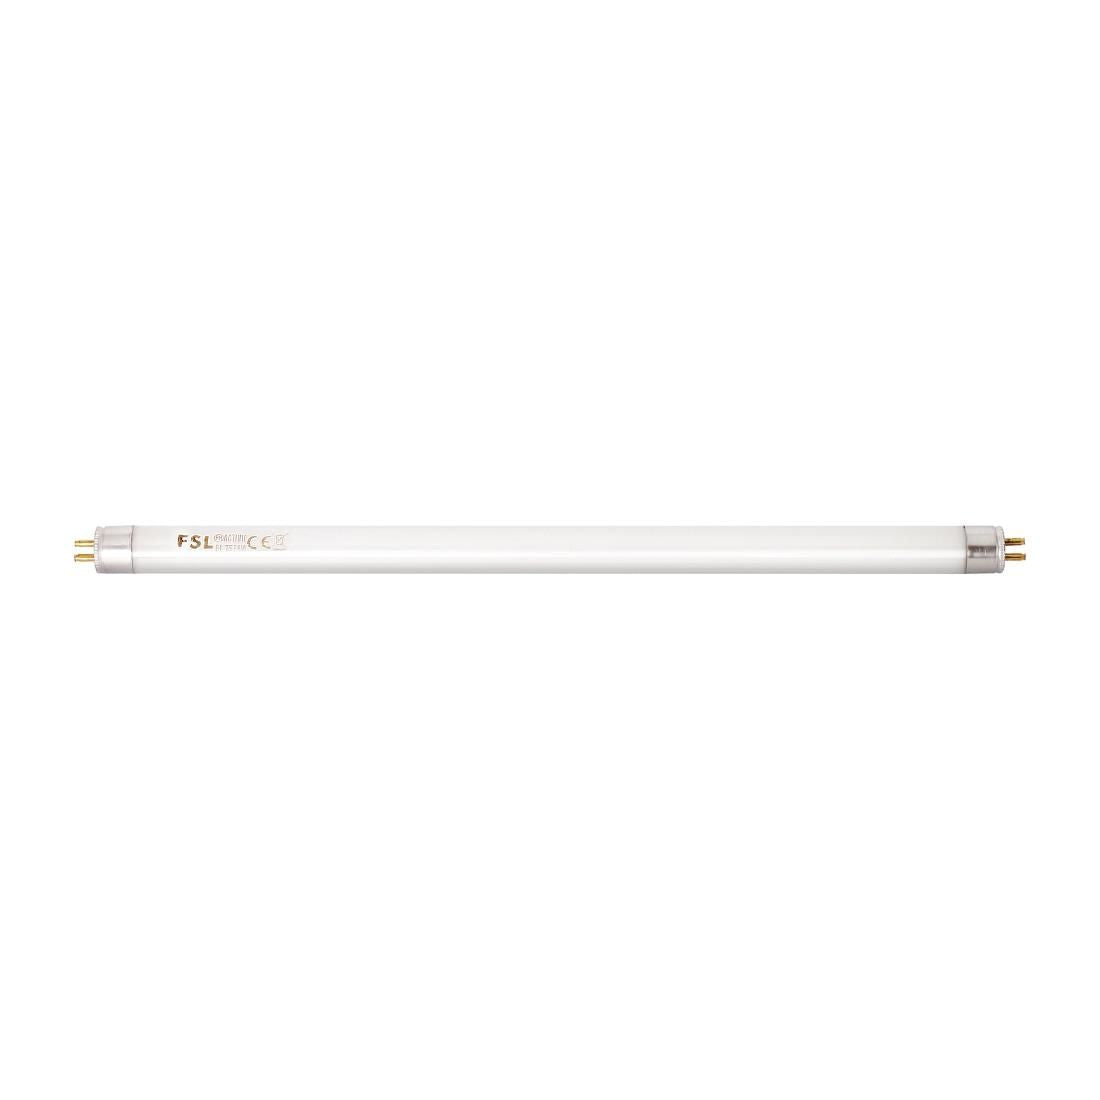 Eazyzap Fly Killer Replacement Fluorescent Bulb 8W JD Catering Equipment Solutions Ltd